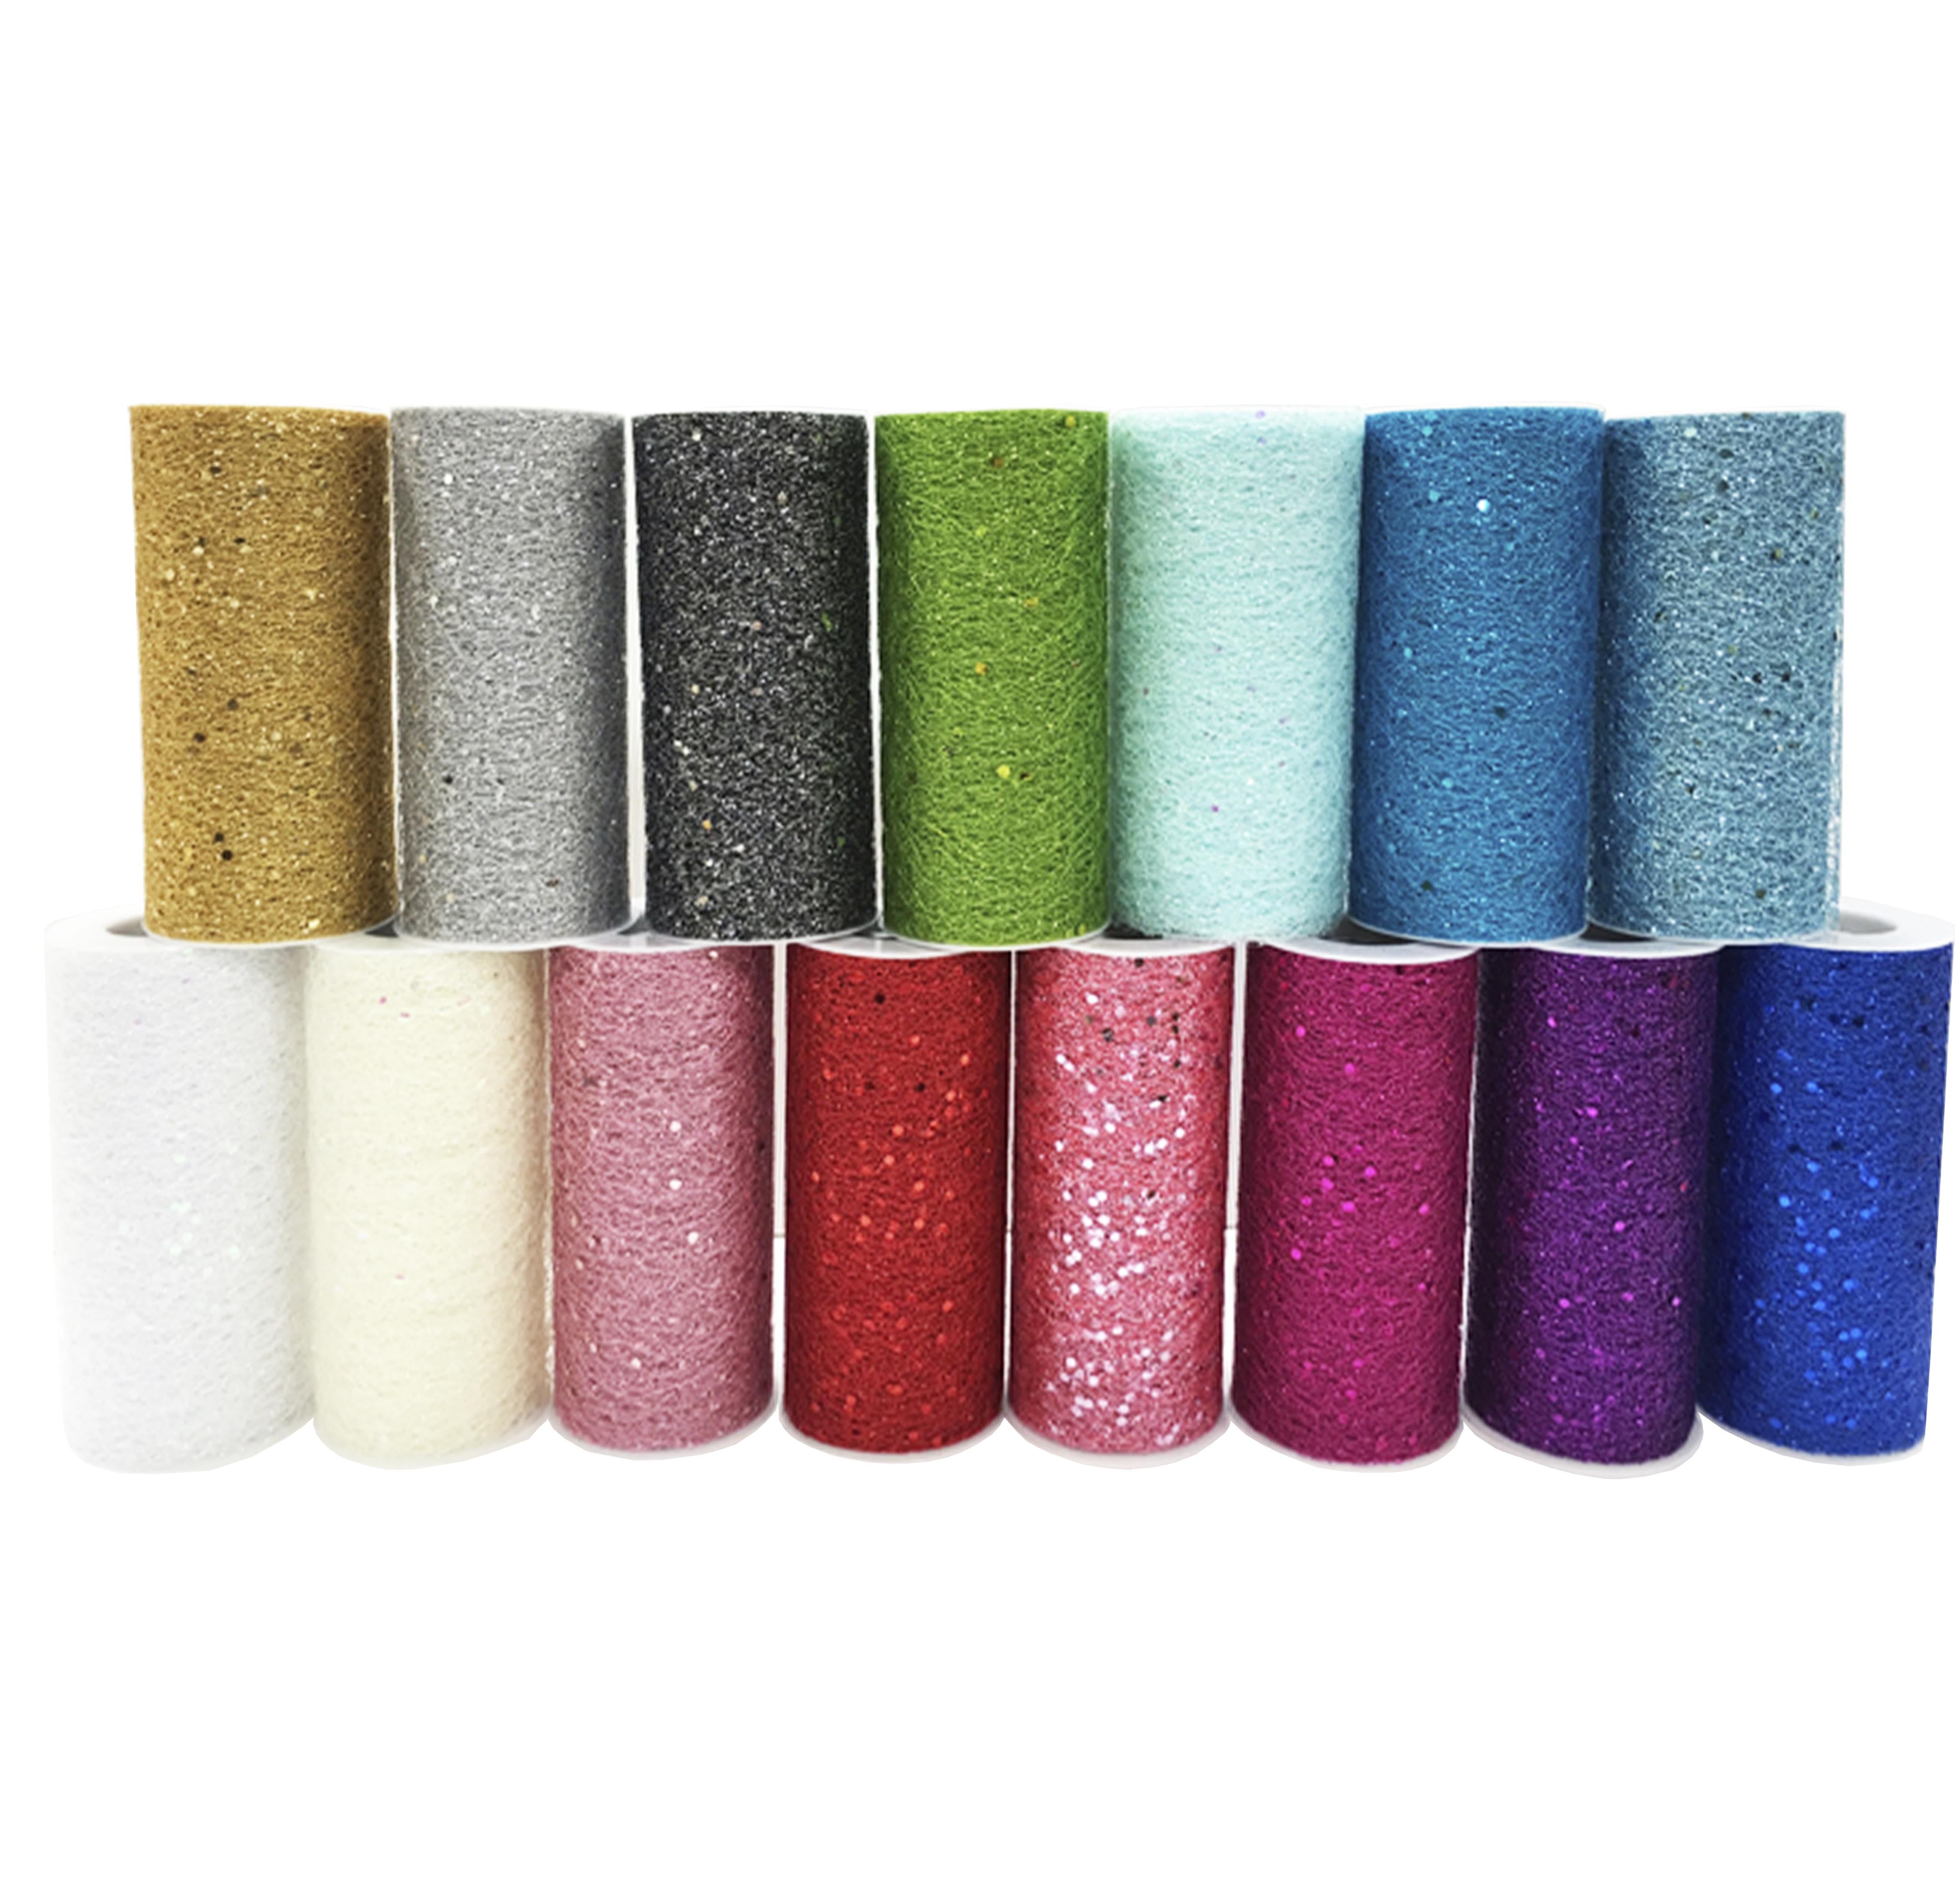 Premium Sequin Soft Tulle Roll 6 inches x 10 Y or 50 Y Shiny Sparkly 